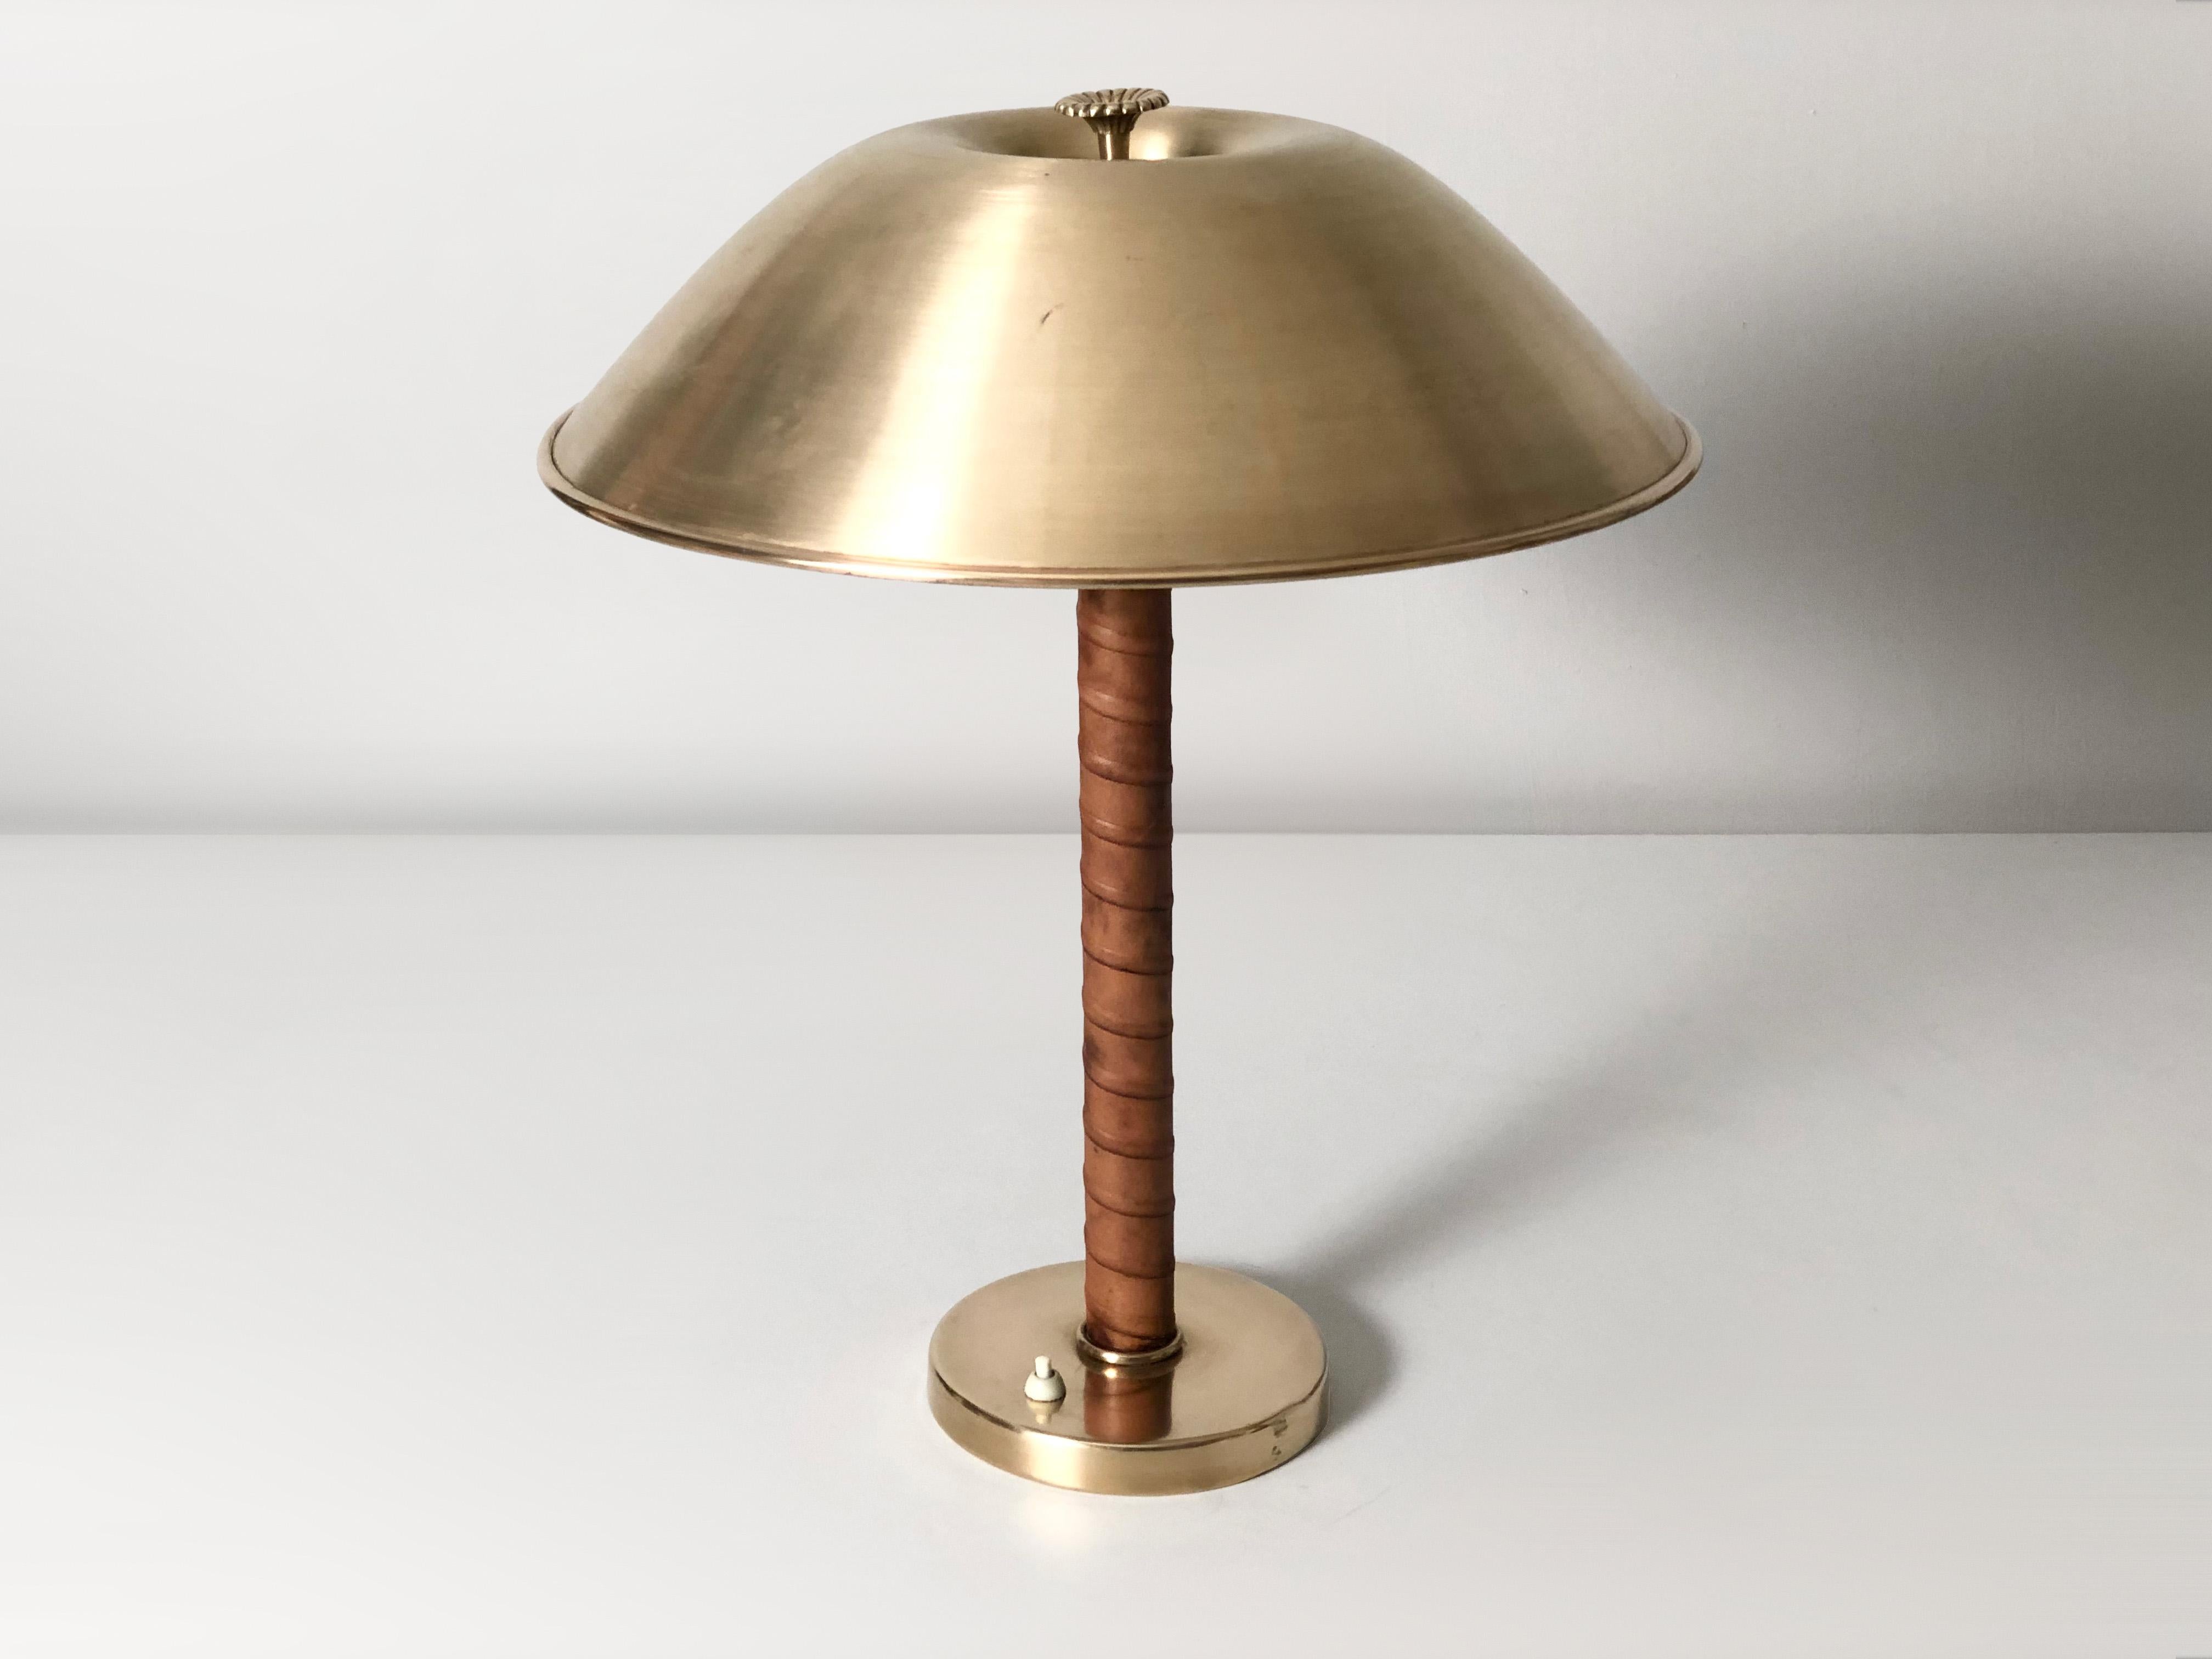 1940’s Leather Wound Brass Table Lamp By Harald Notini For NK (Nordiska Kompaniet). Cast iron base with spun brass cover, leather wound stem and spun brass lamp shade with cast brass flower shaped ornament. Holds two E27 or E26 standard Edison style